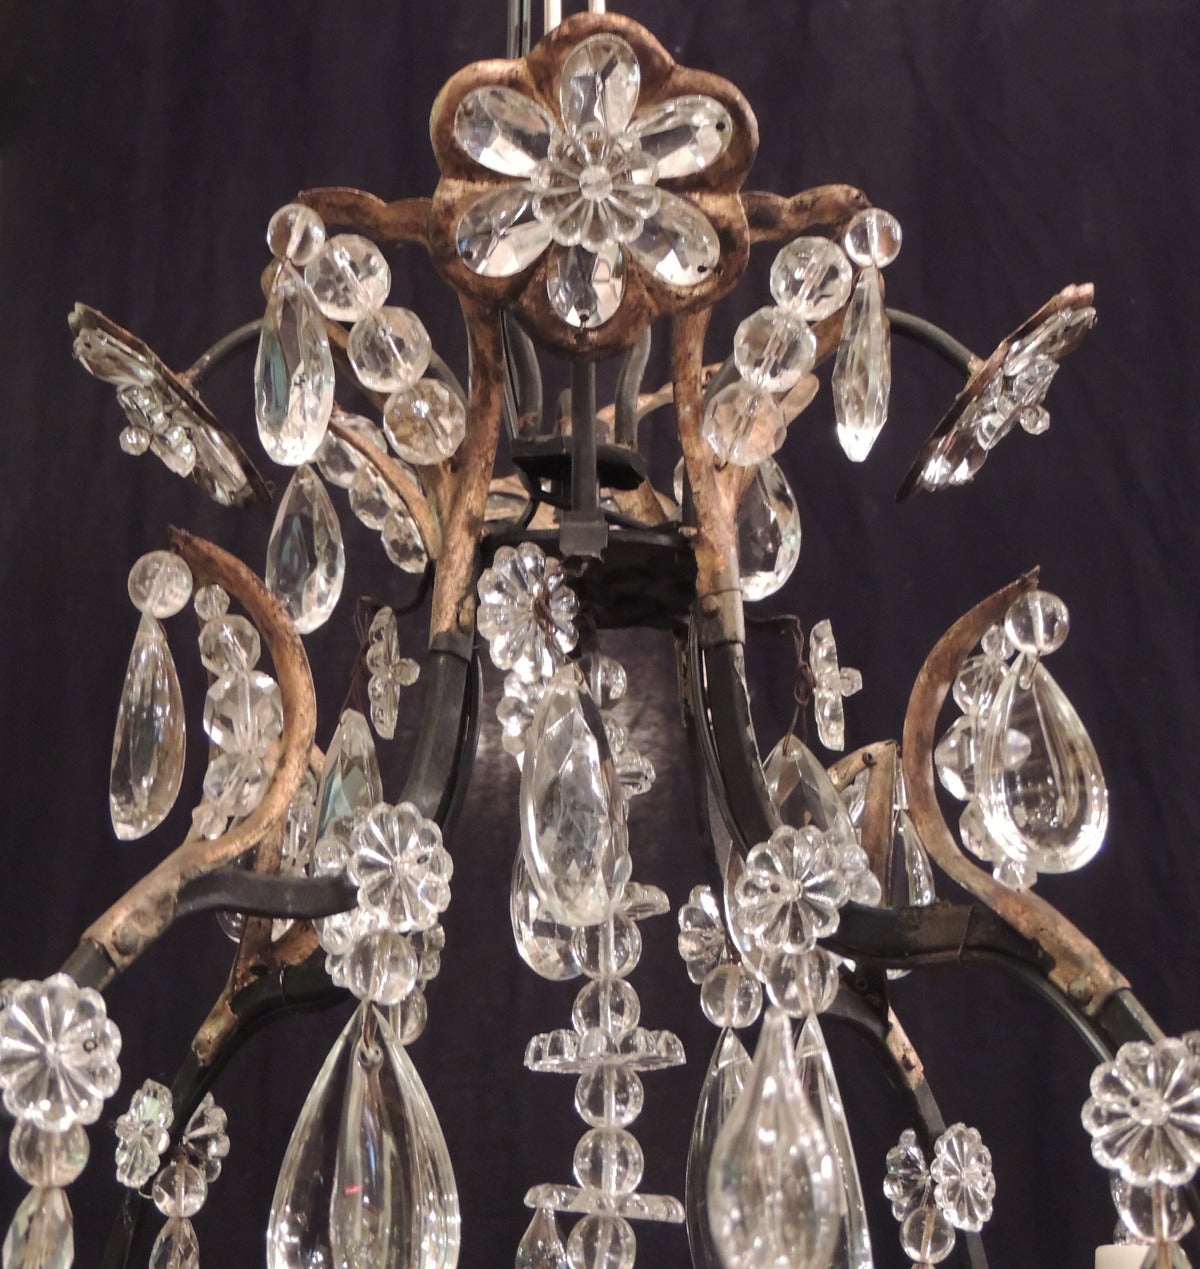 This chandelier was made in France during the first half of the 20th Century, circa 1930. This chandelier has an iron and tole frame covered in varied shapes and sizes of crystal prisms. The apex of the piece has crystal rosettes and beads. The